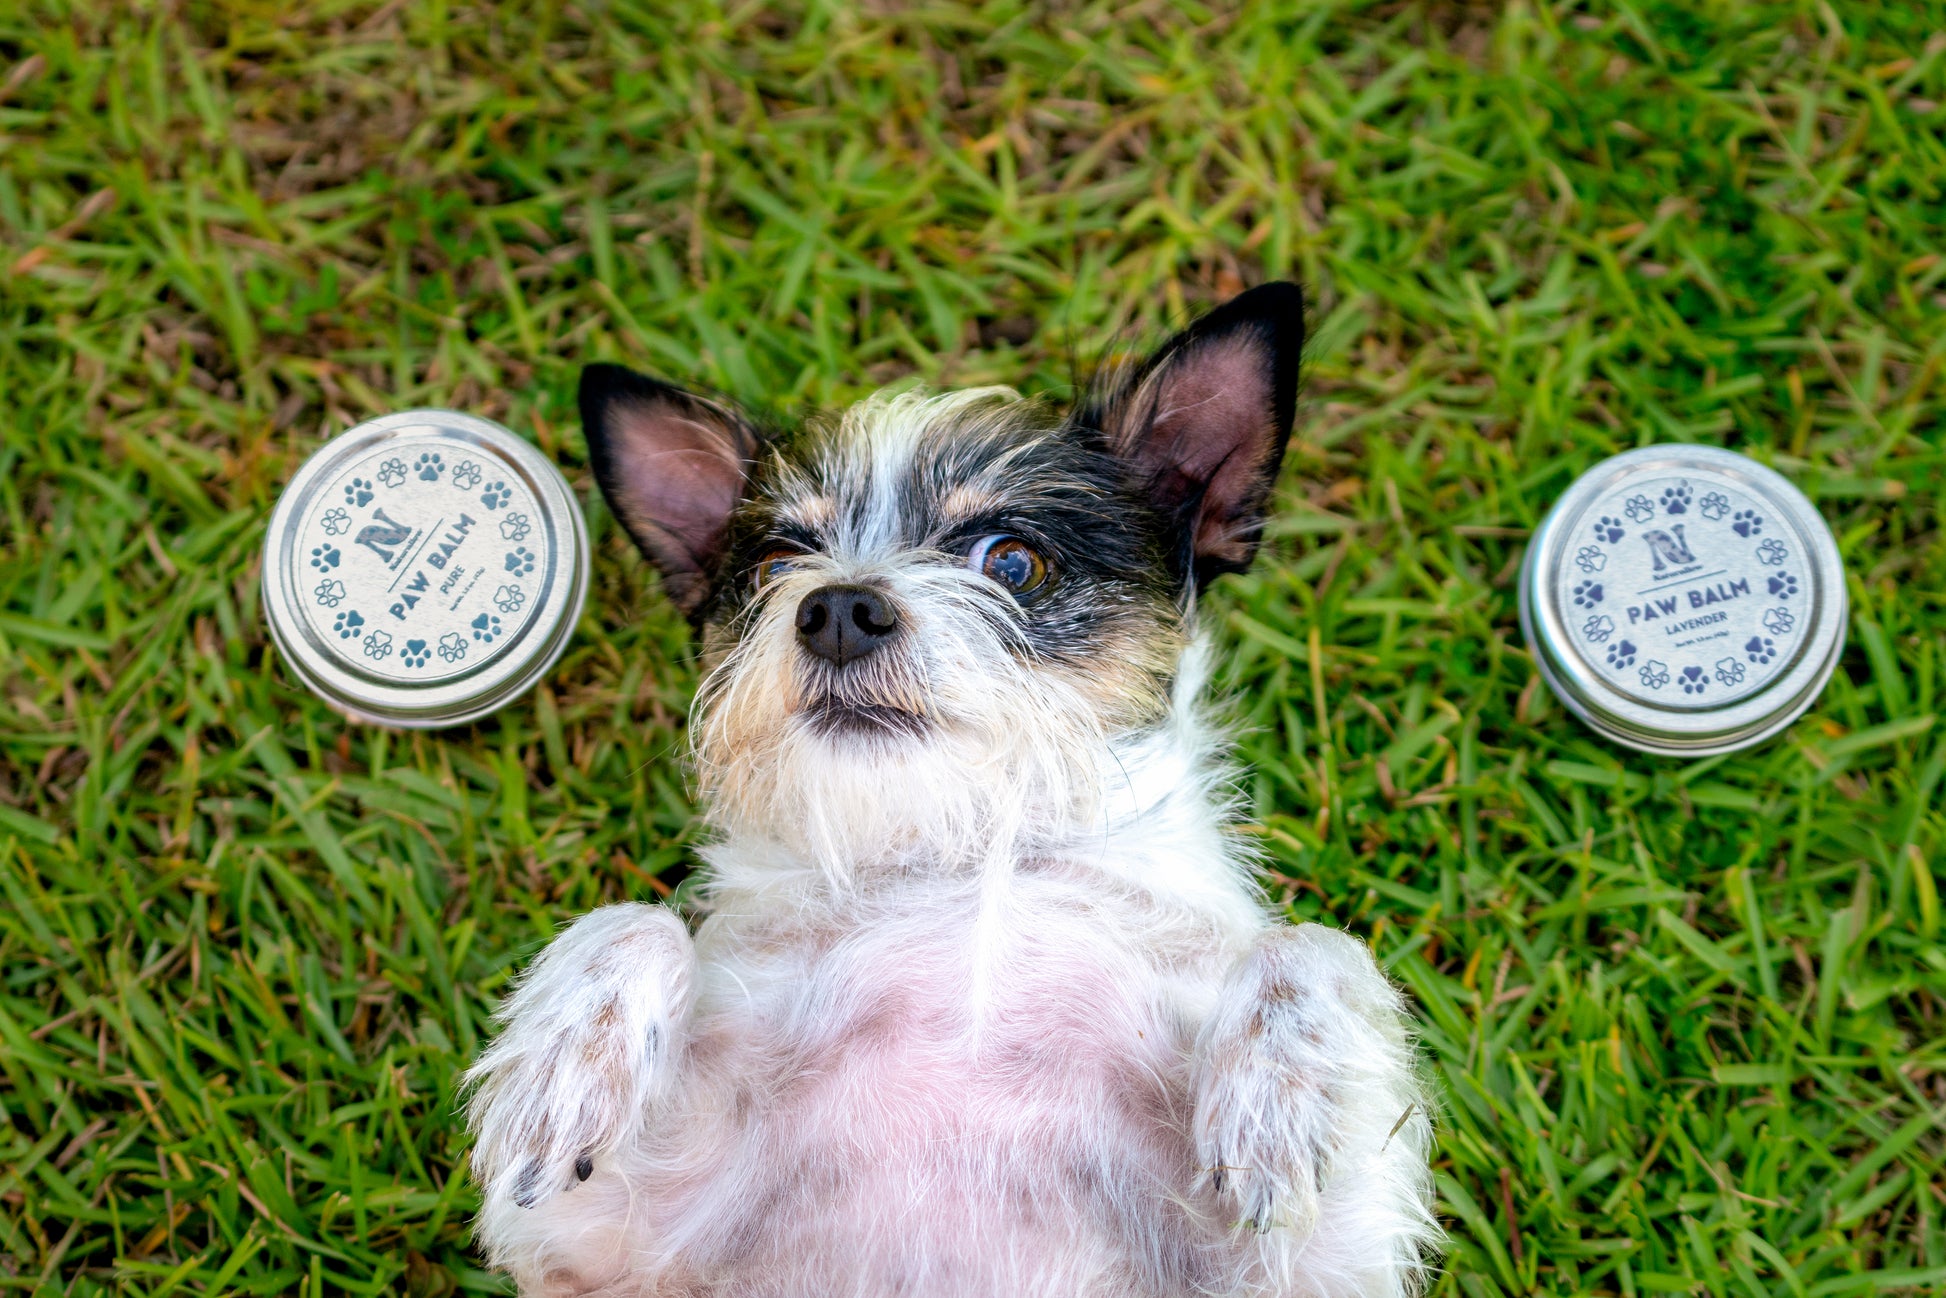 A picture containing two circular tins sitting in the grass with a small white and black furry dog laying on its back between them. The tin to the left is small and circular with light blue paw print illustrations. Its label reads "Naturallow Paw Balm Pure. Net Weight 1.5 oz (42g)". The tin to the right is also small and circular, but has purple paw print illustrations. Its label reads "Naturallow Paw Balm Lavender. Net Weight 1.5 oz (42g)"